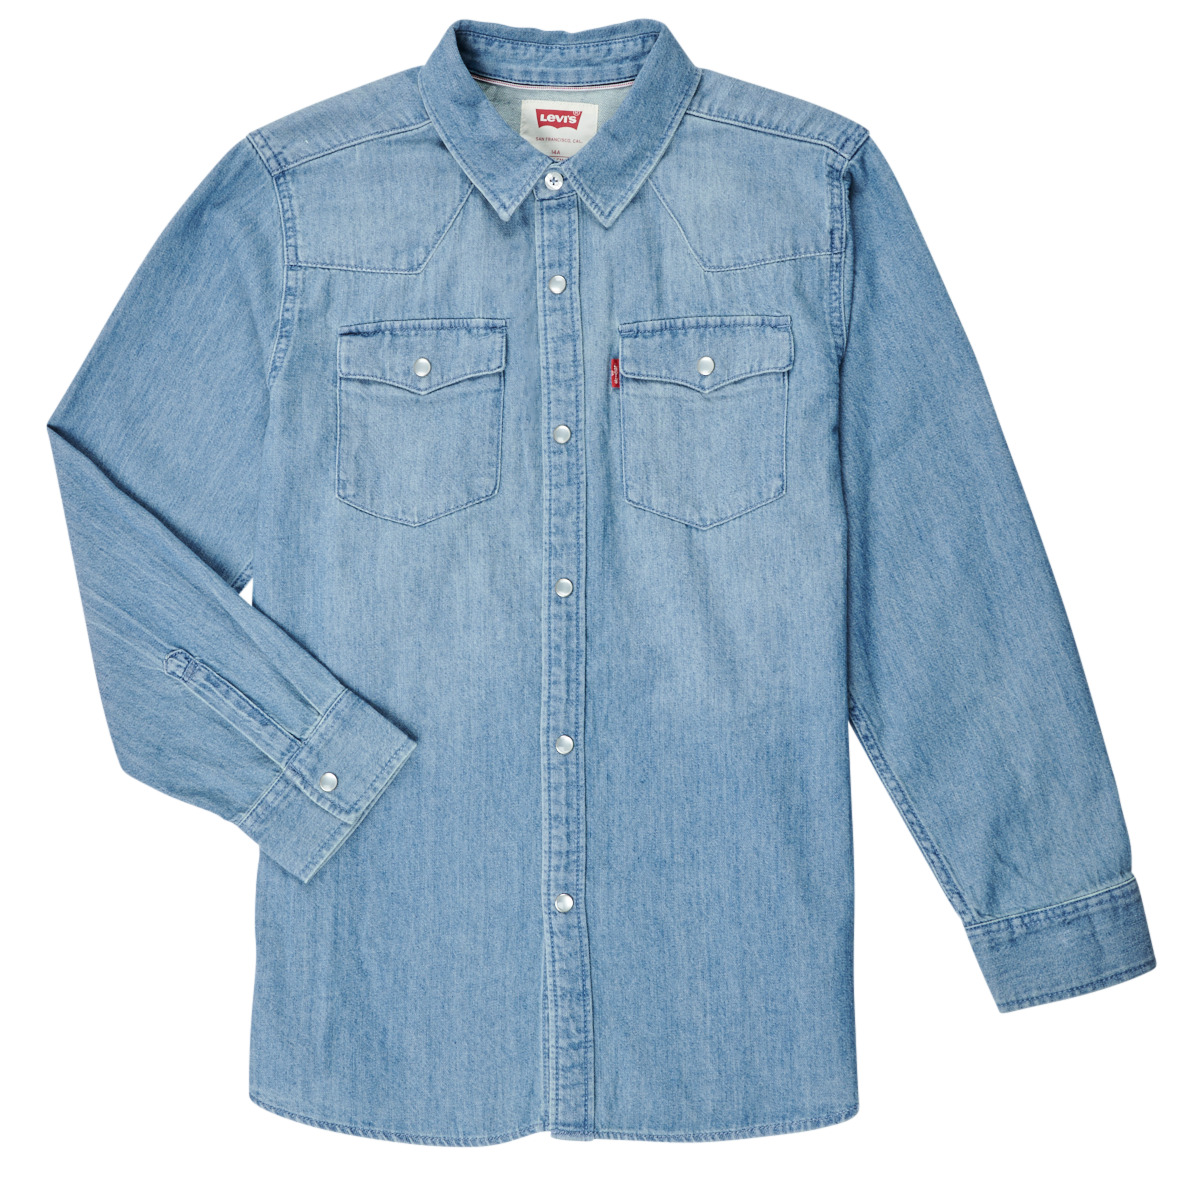 Levi's BARSTOW WESTERN SHIRT Blue - Free delivery | Spartoo NET ! -  Clothing long-sleeved shirts Child USD/$